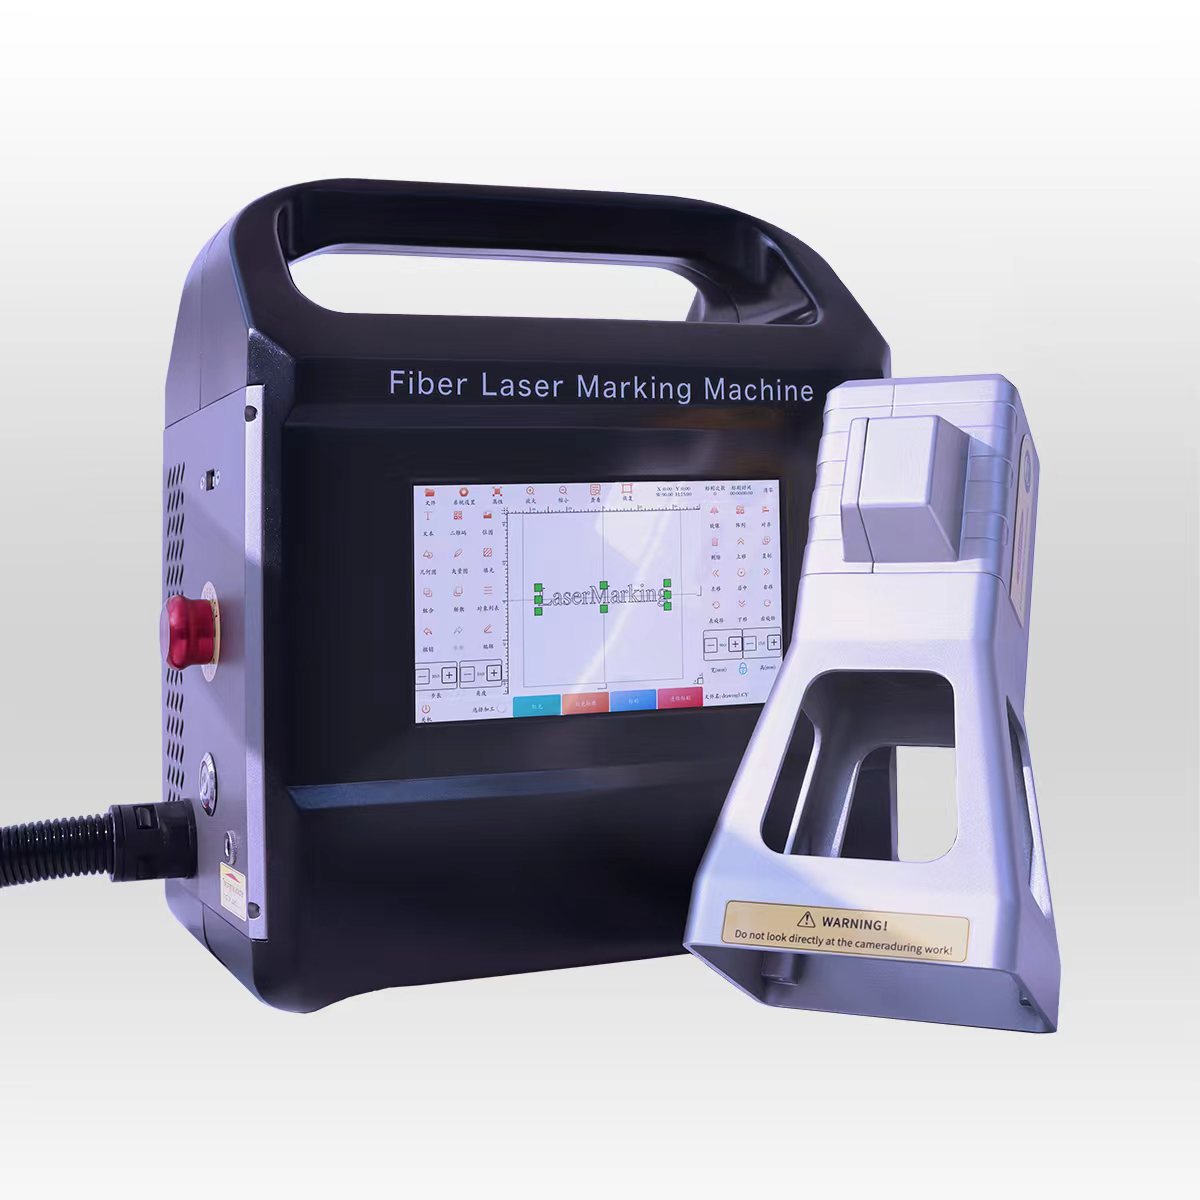 Application of New Fiber Laser Marking Machine And Comparison with Other Marking Machines